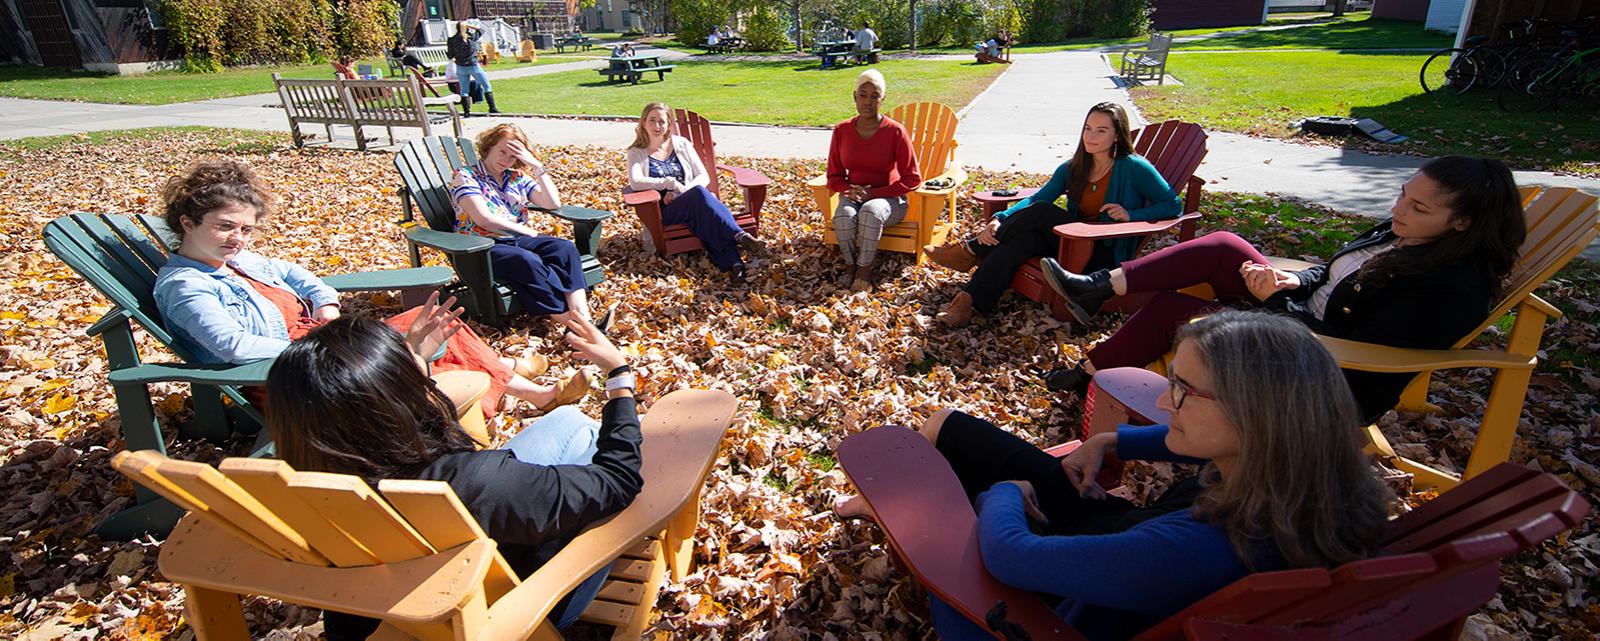 Students discussing outside in Fall Foliage